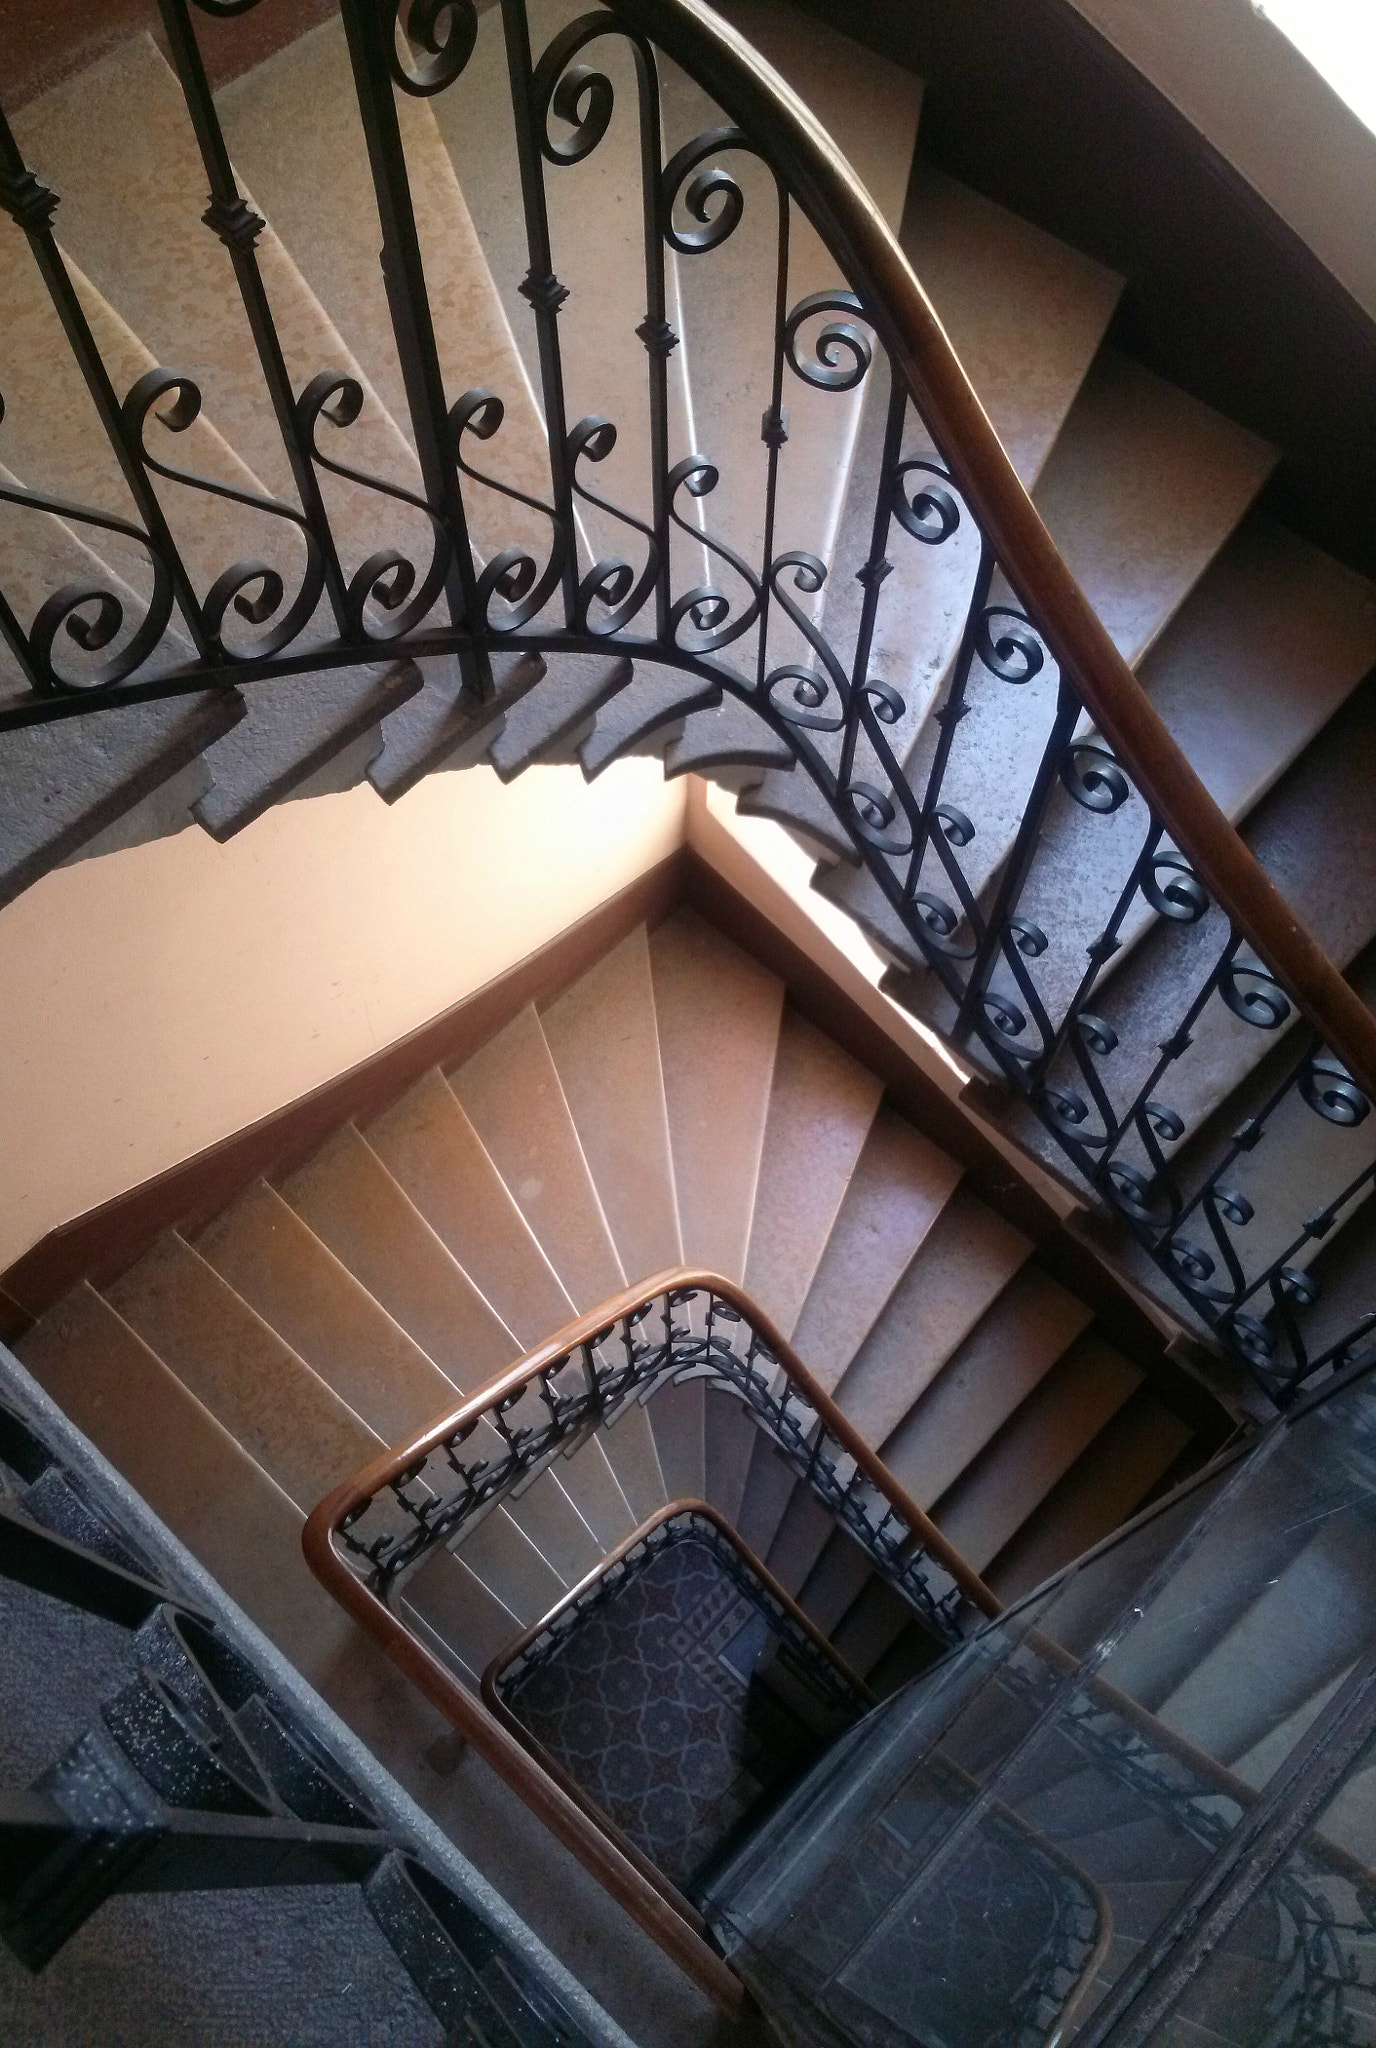 LG Optimus G sample photo. Spiral staircase cage d'escalier grenobloise photography